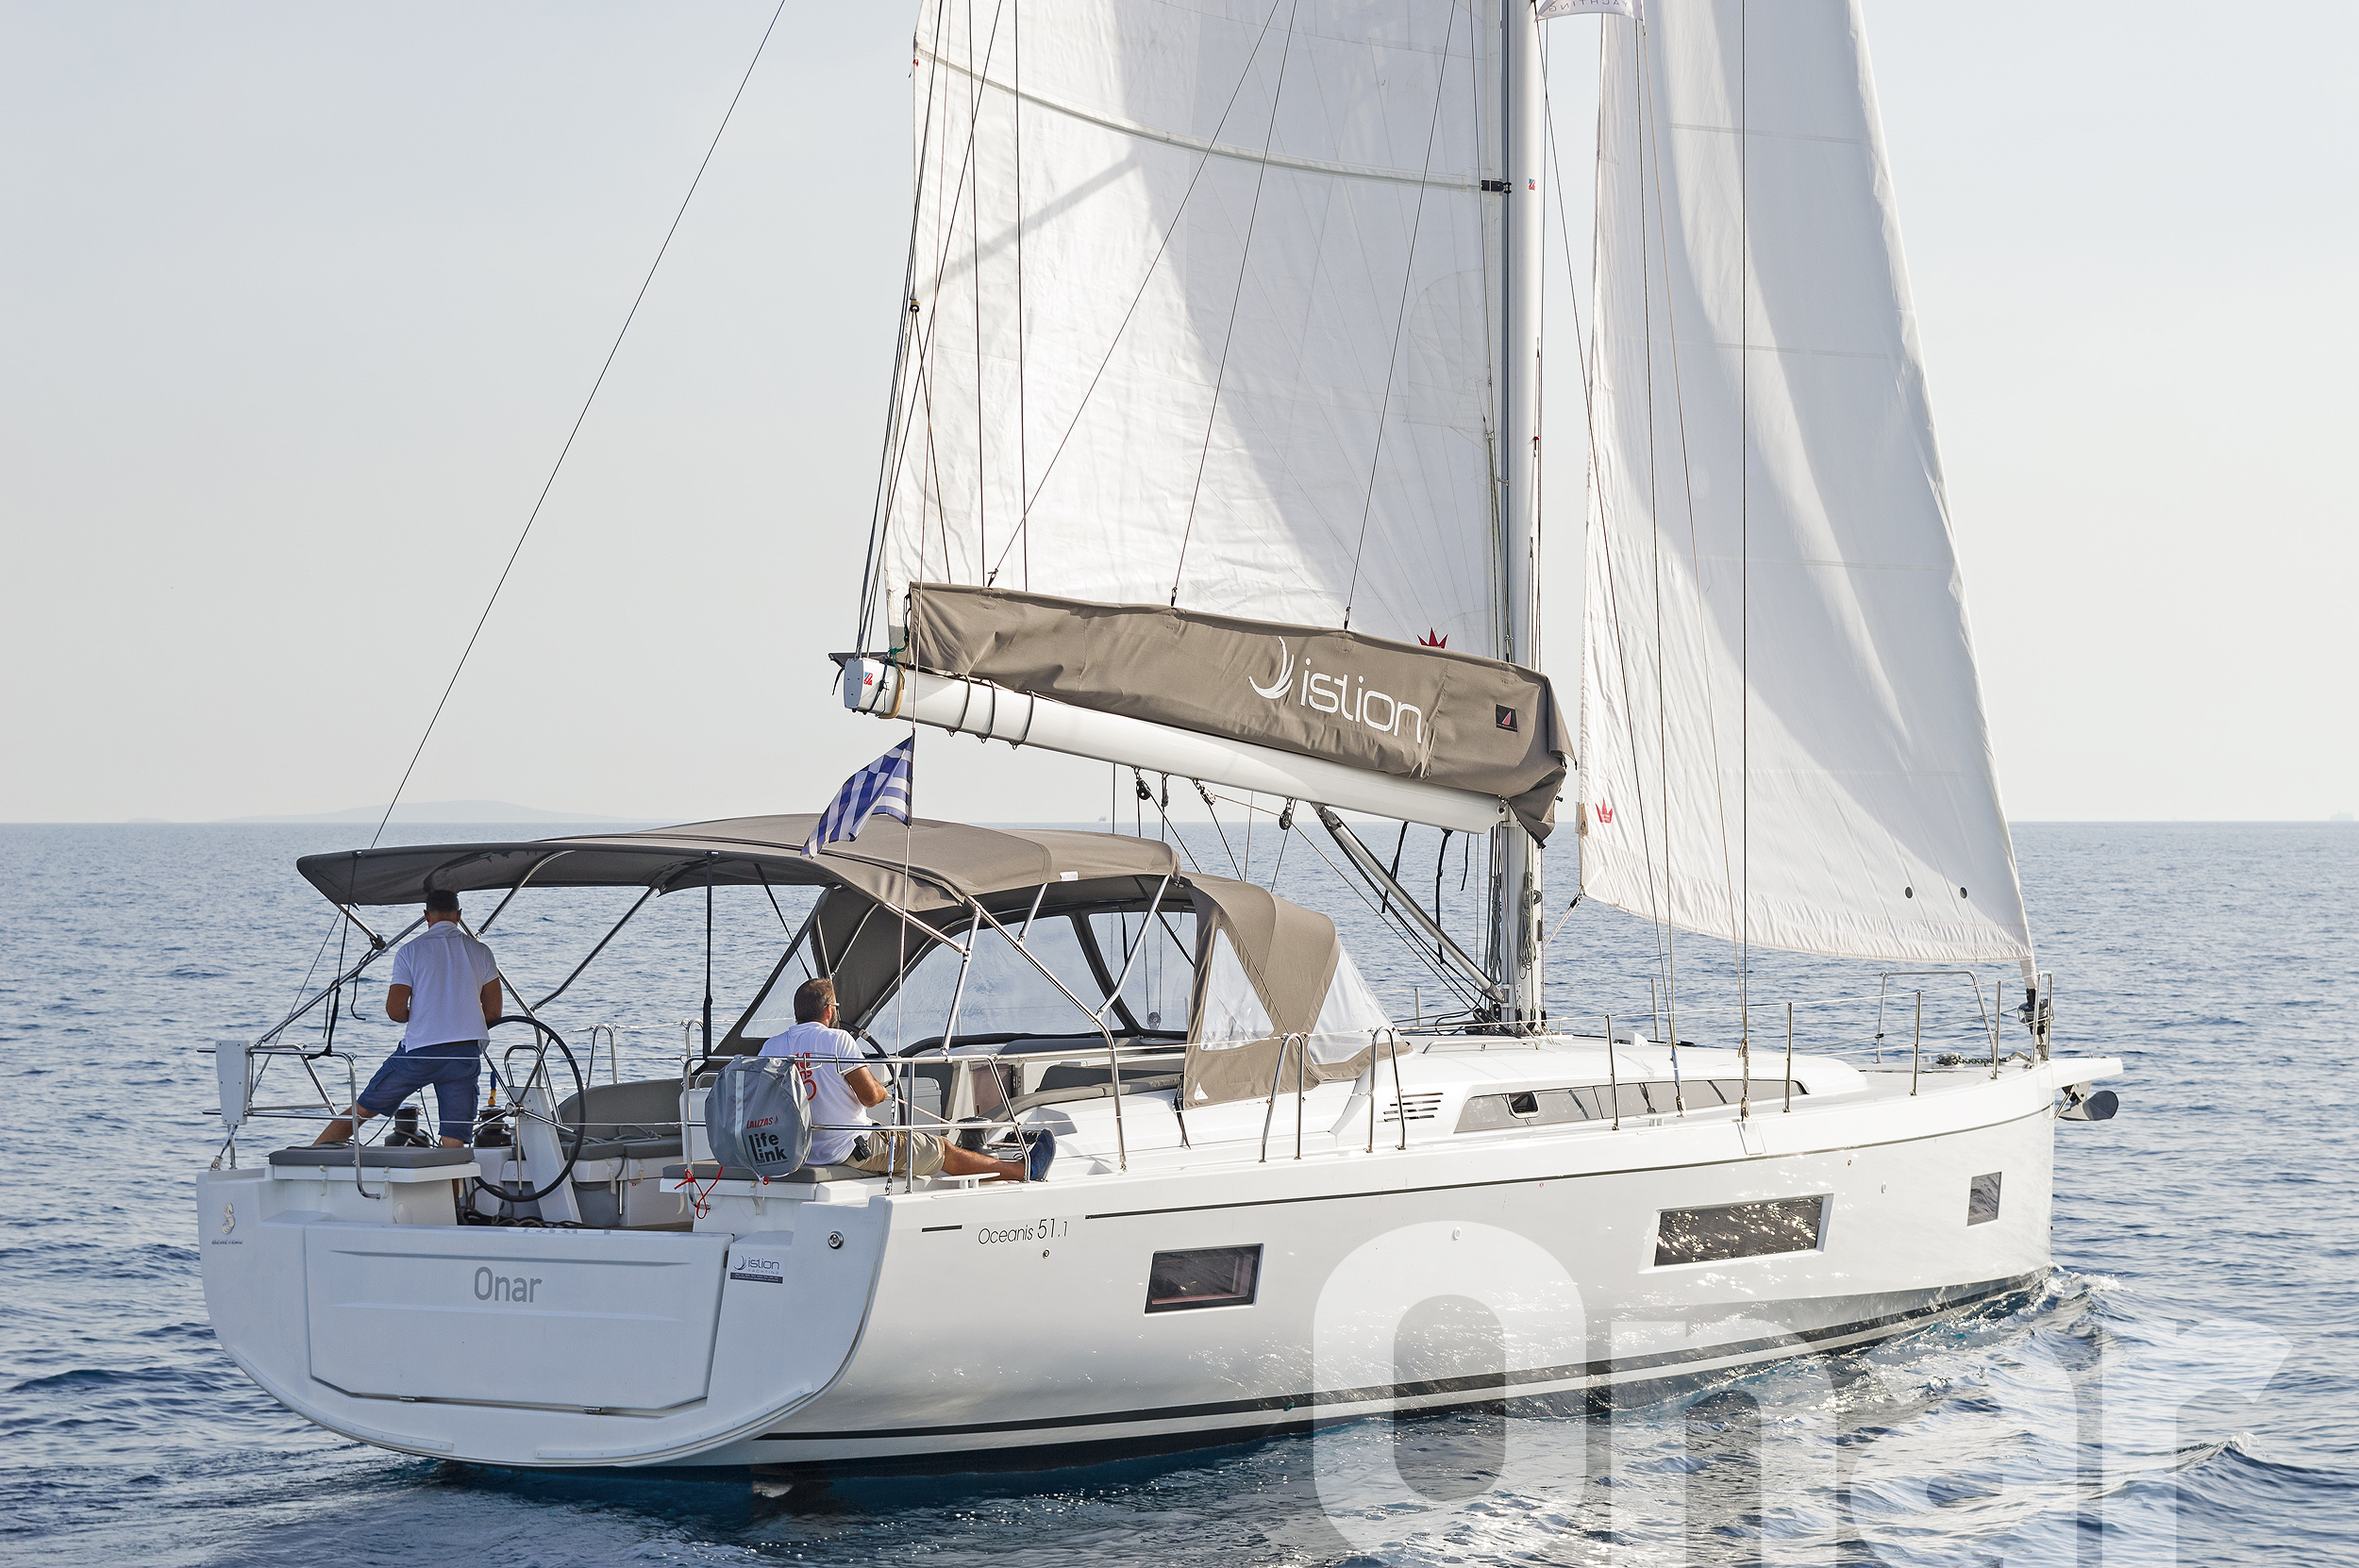 Oceanis 51.1 - Yacht Charter Abaco Islands & Boat hire in Greece Athens and Saronic Gulf Athens Alimos Alimos Marina 1